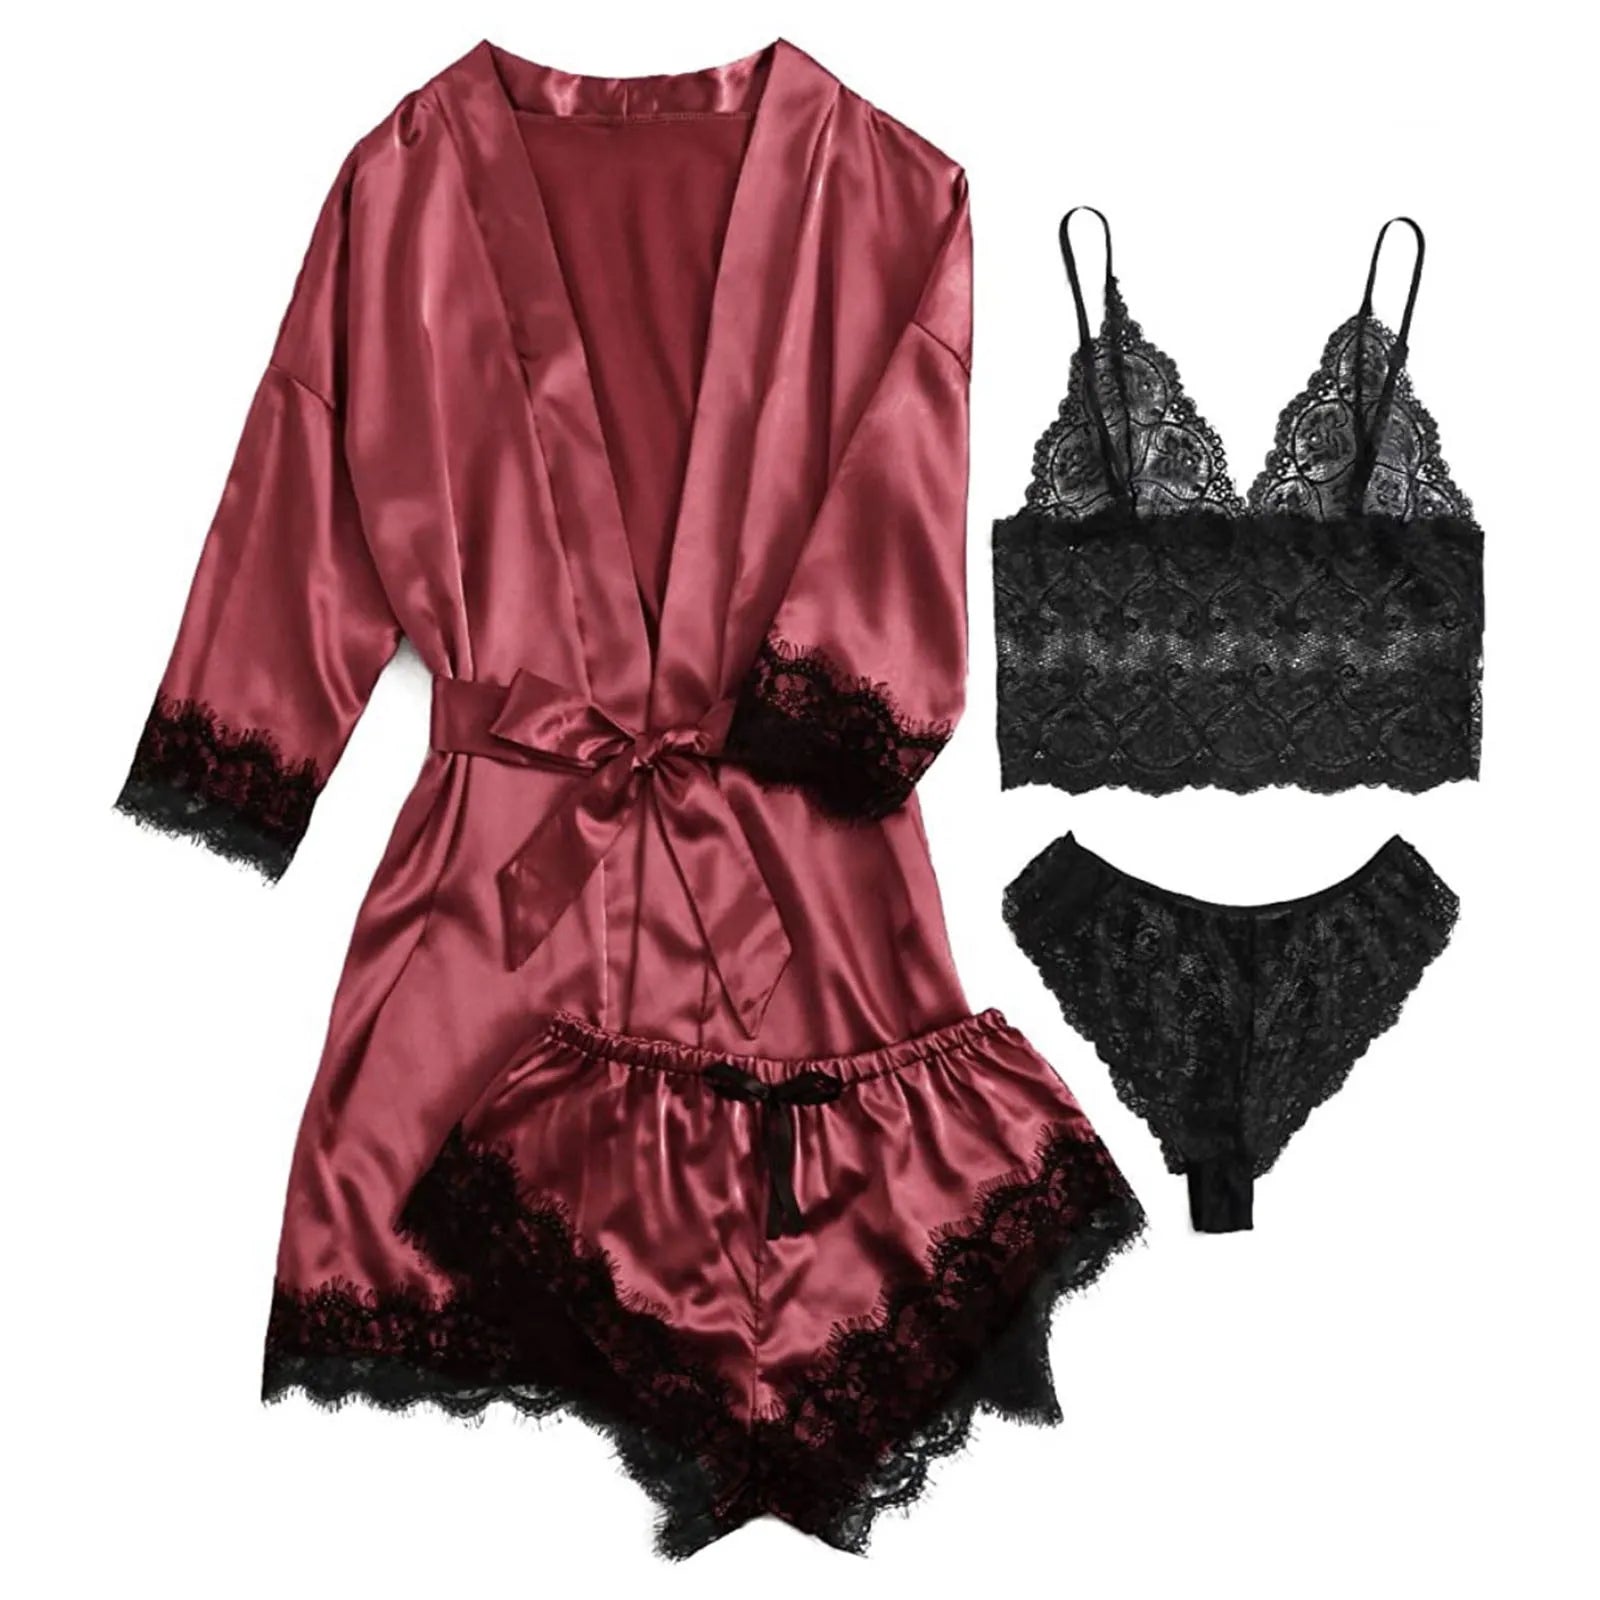 Women's Silk Satin Pajamas Set: 4 Pieces Lingerie Floral Lace Sleepwear With Robe Nightgown Long - Club Trendz 